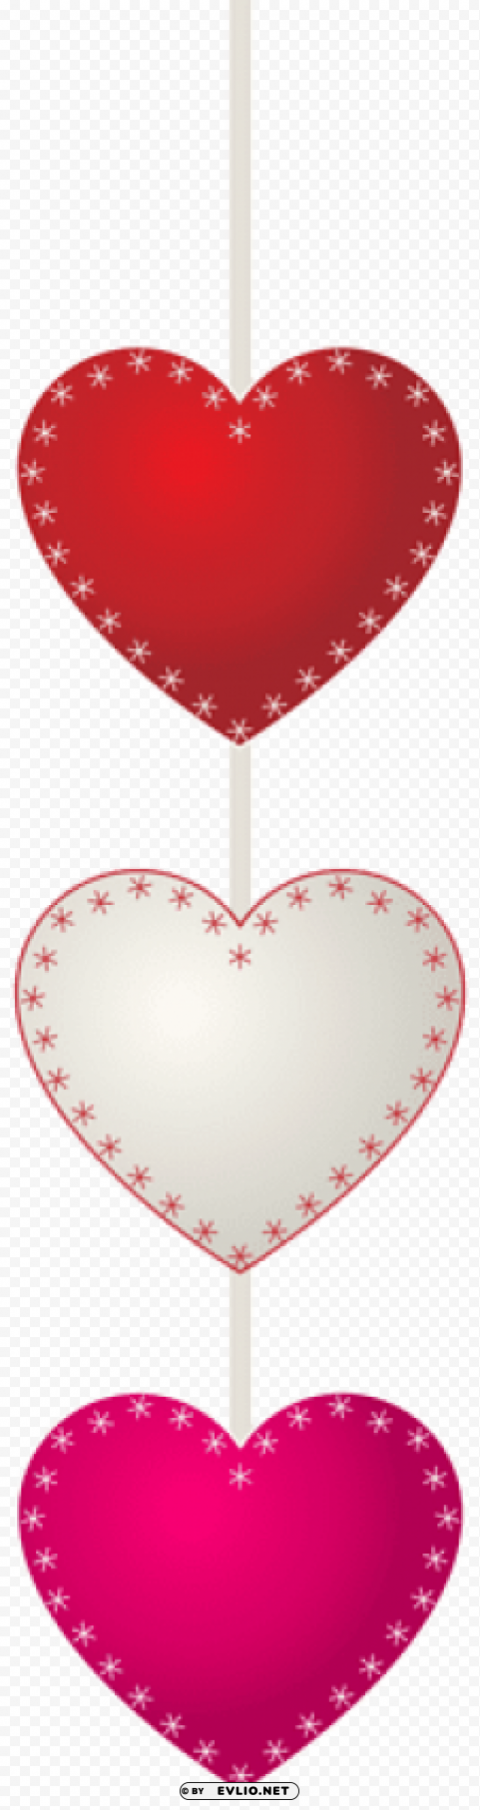 deco hearts Isolated Graphic on HighQuality PNG